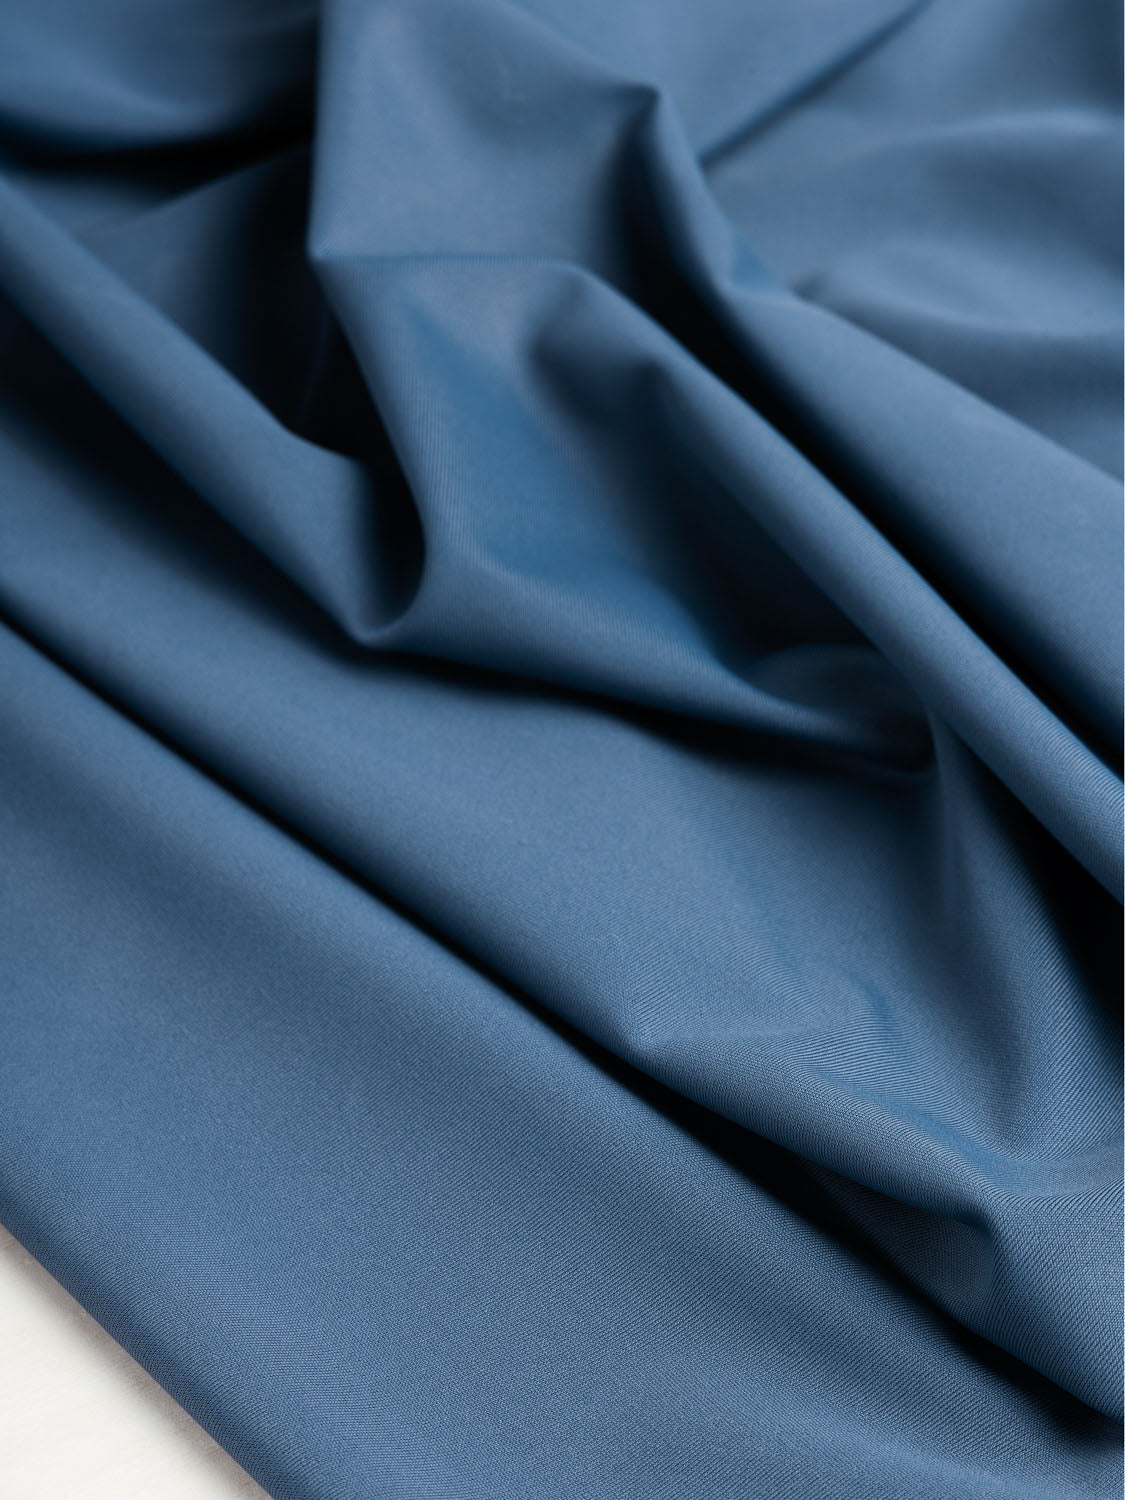 Cotton Satin Lycra Fabric (44 Inches) Stretchable & Ready to Dye